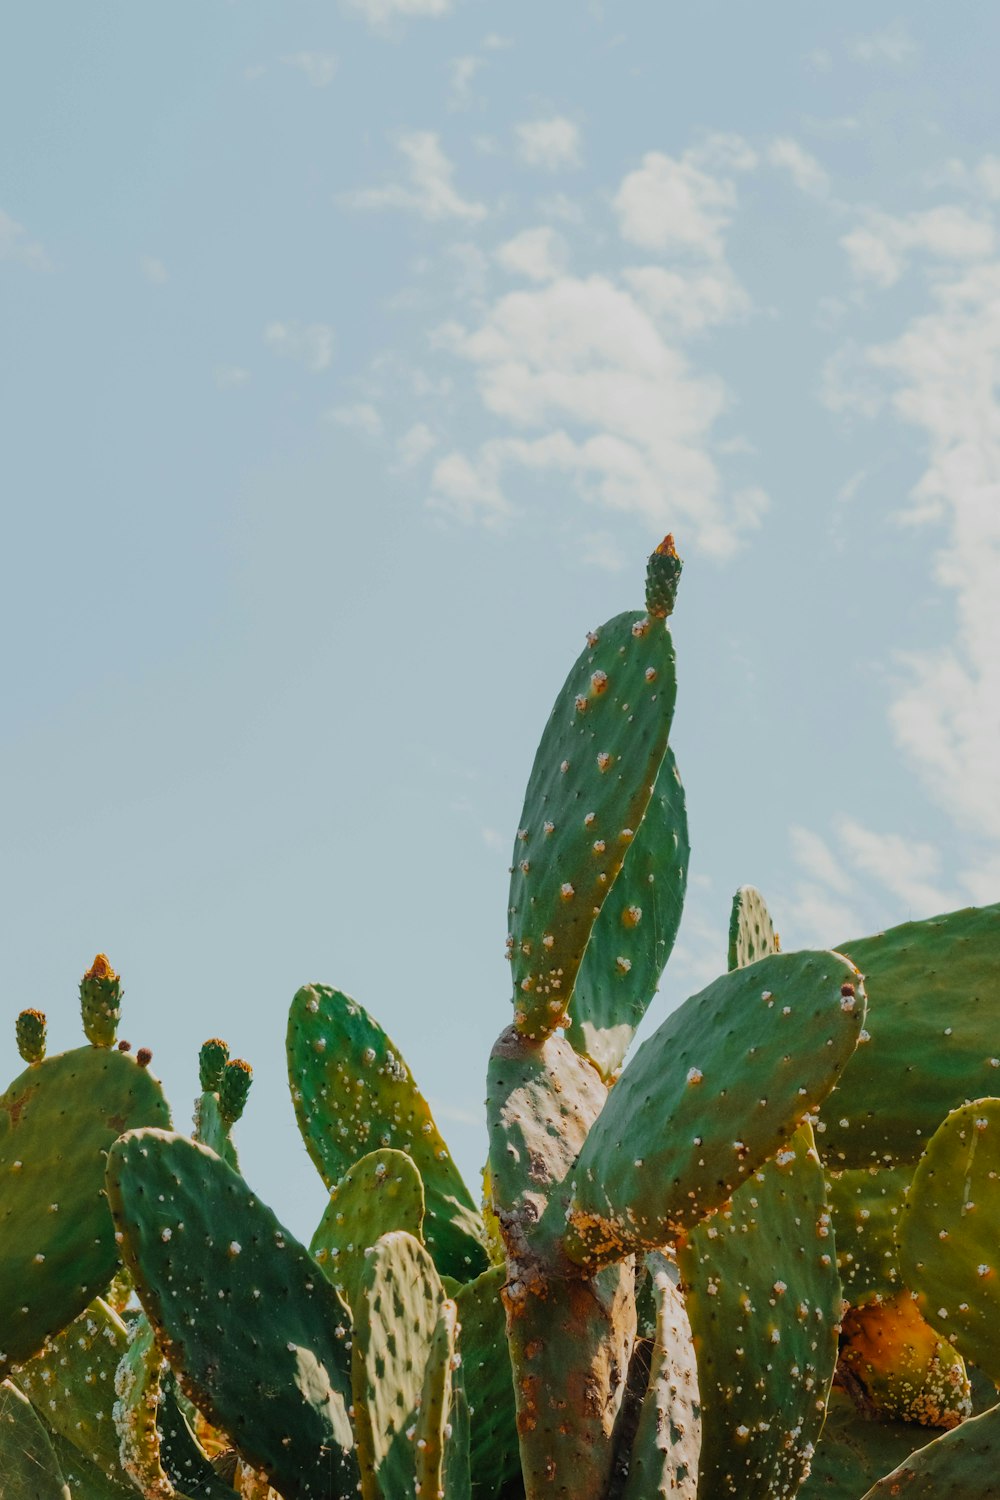 green cactus plants under white clouds during daytime